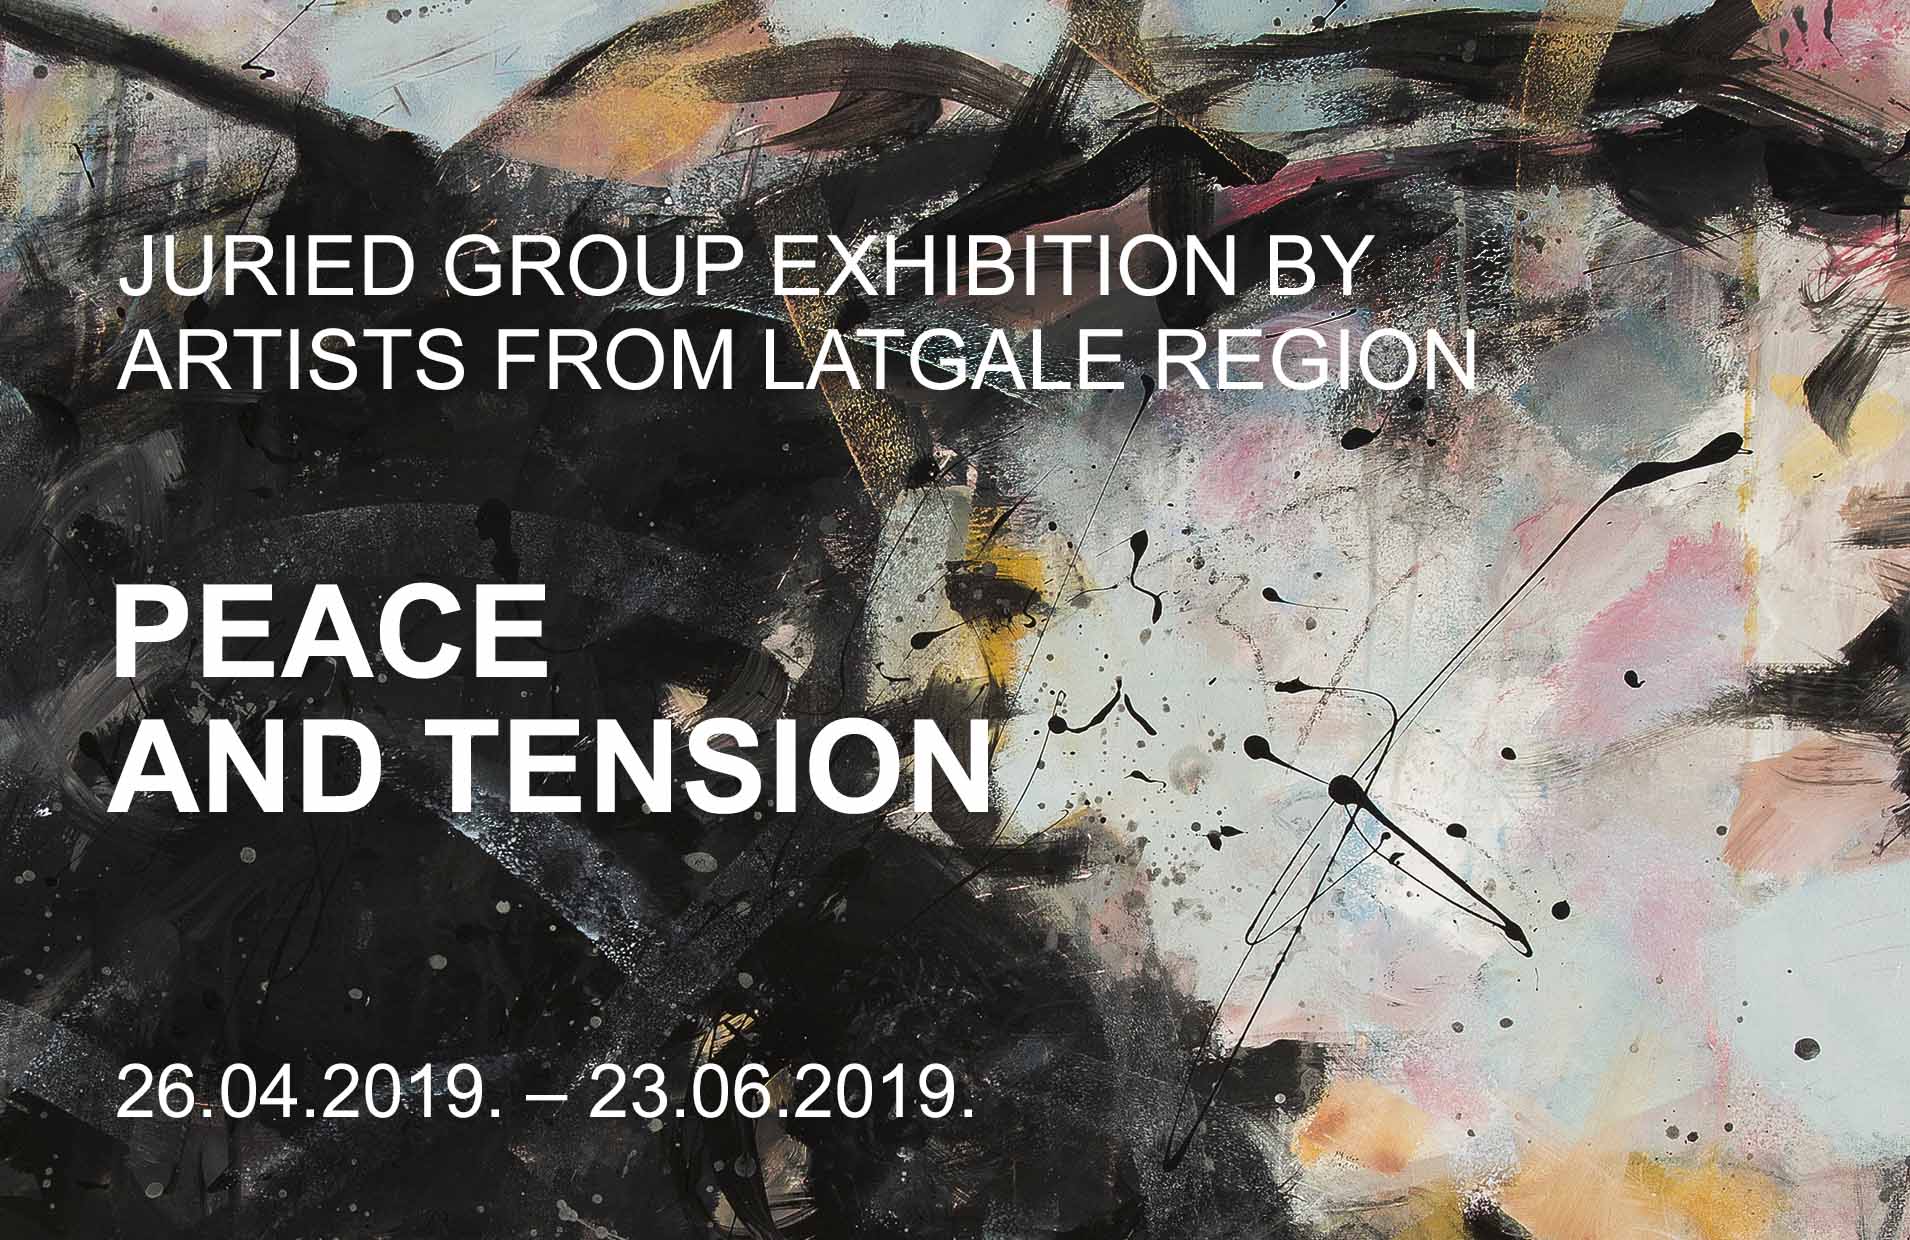 PEACE AND TENSION: Juried Group Exhibition by Artists from Latgale Region